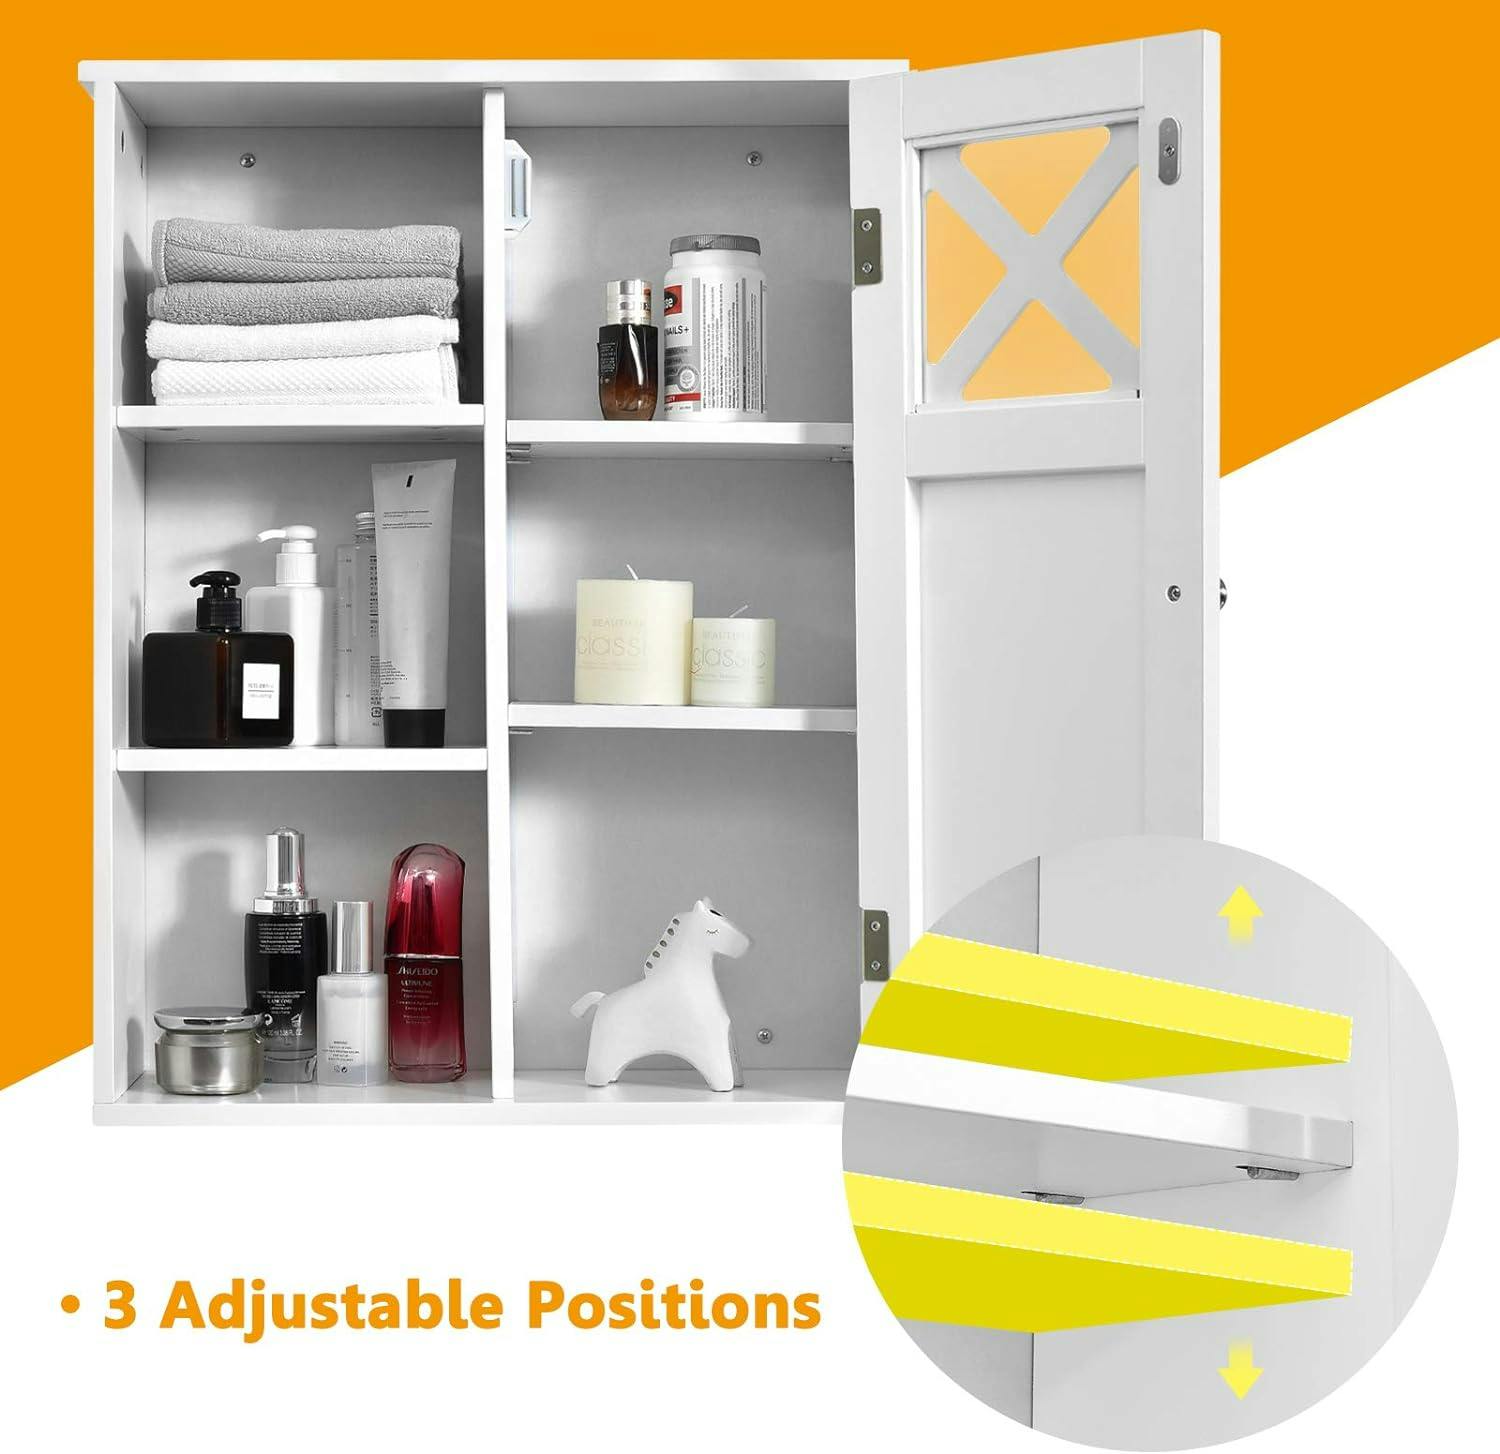 Elegant White Wall-Mounted Bathroom Cabinet with 2-Tier Storage and Open Shelf